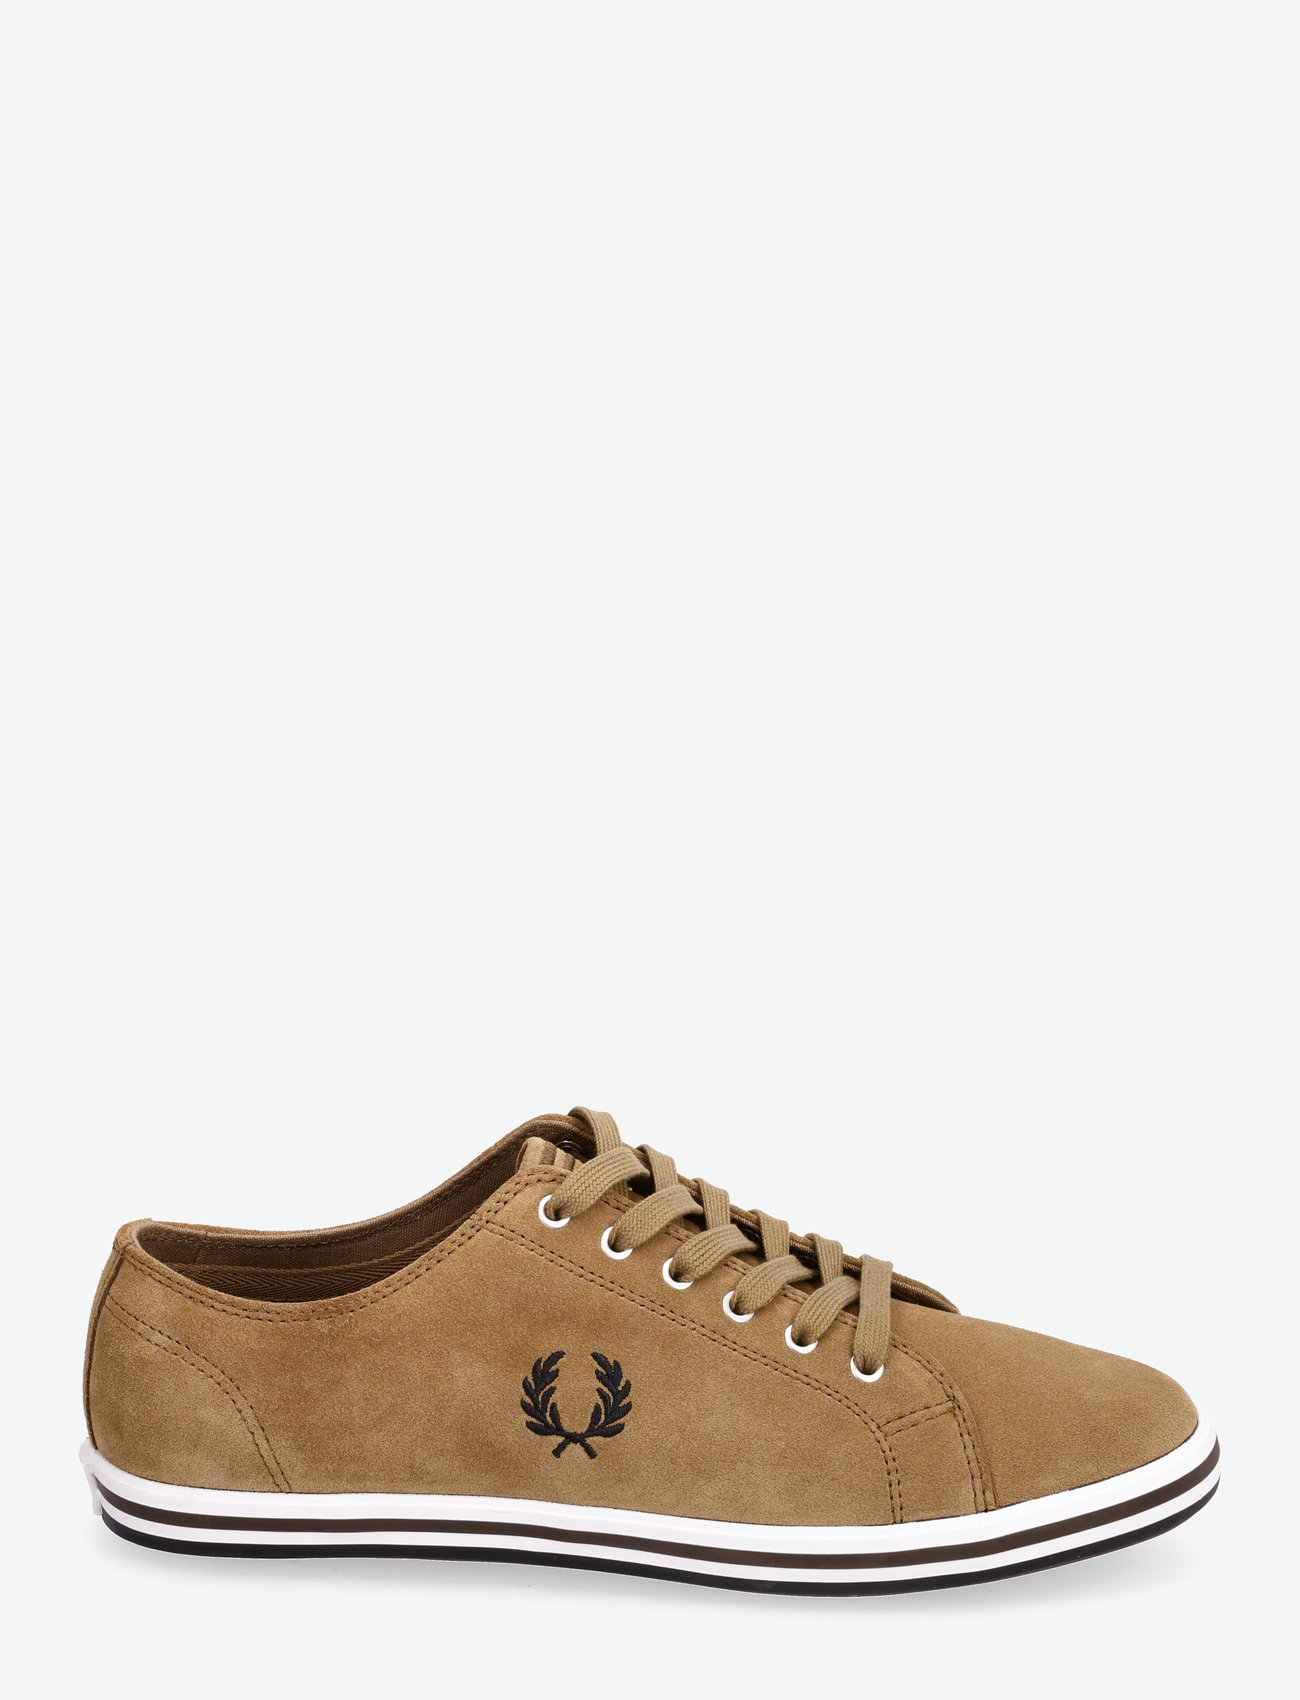 Fred Perry - KINGSTON SUEDE - low tops - shd stn/brnt tob - 1